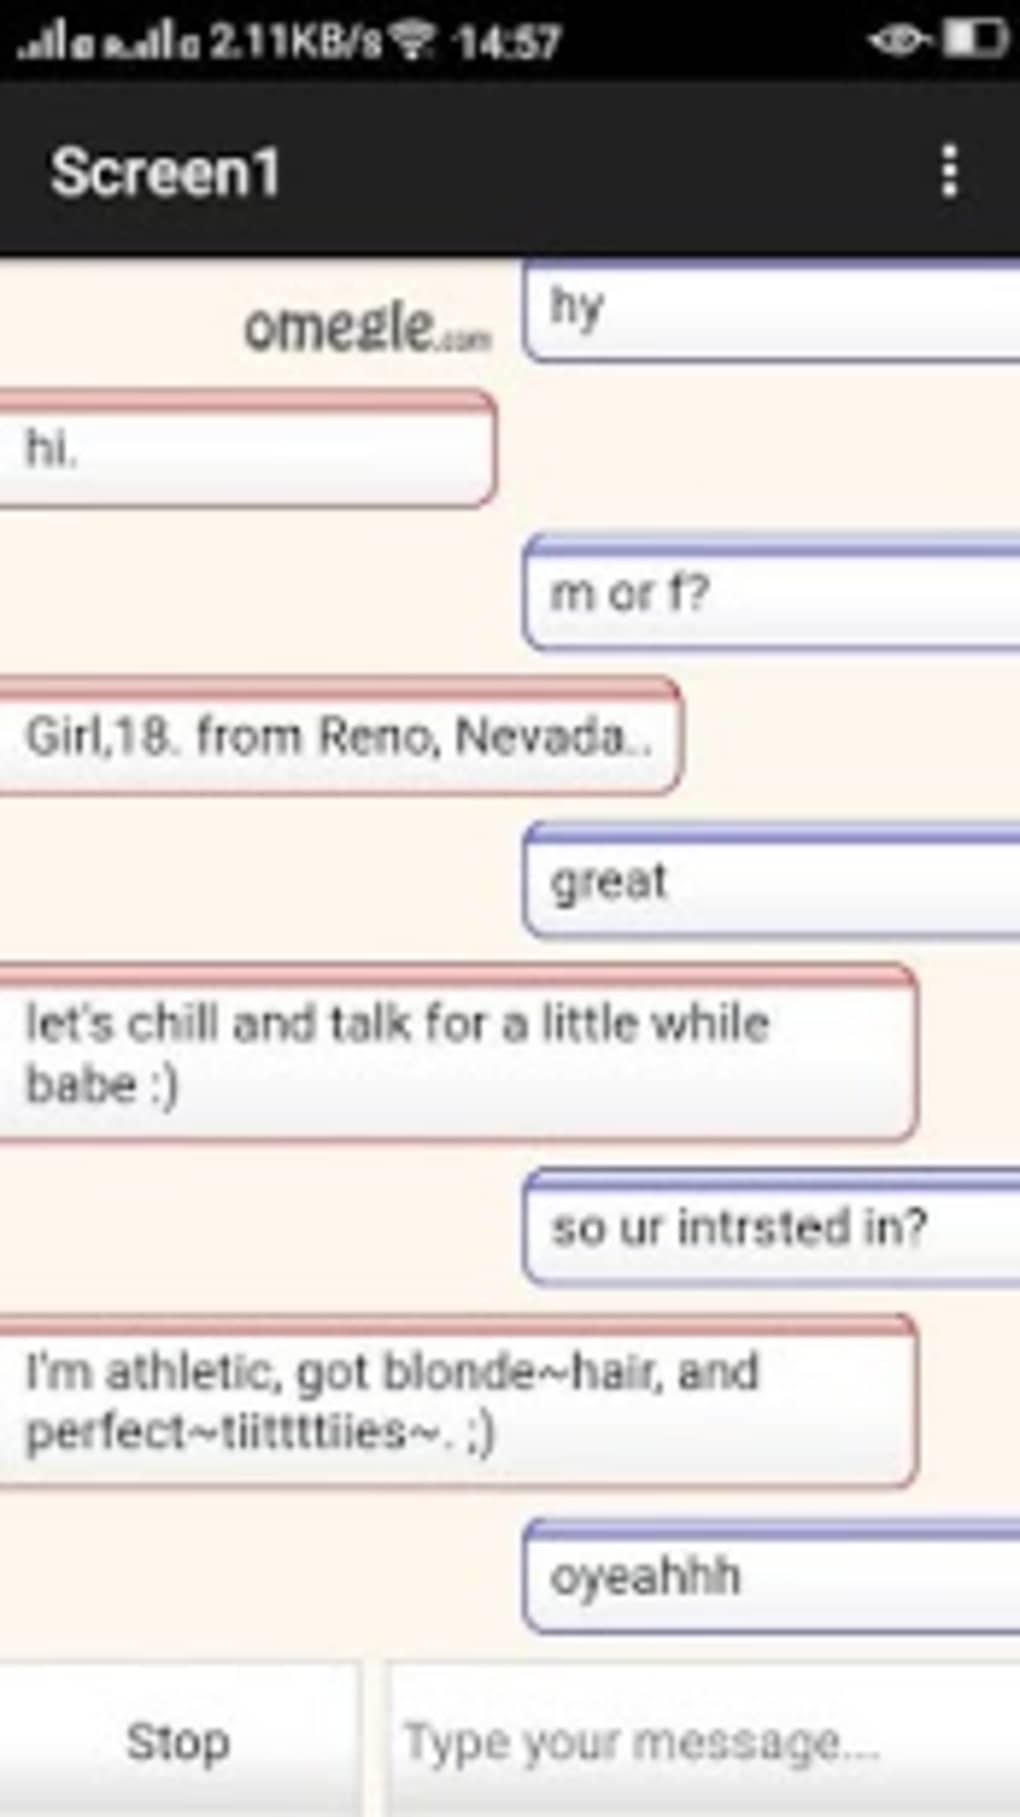 Www omegle chat